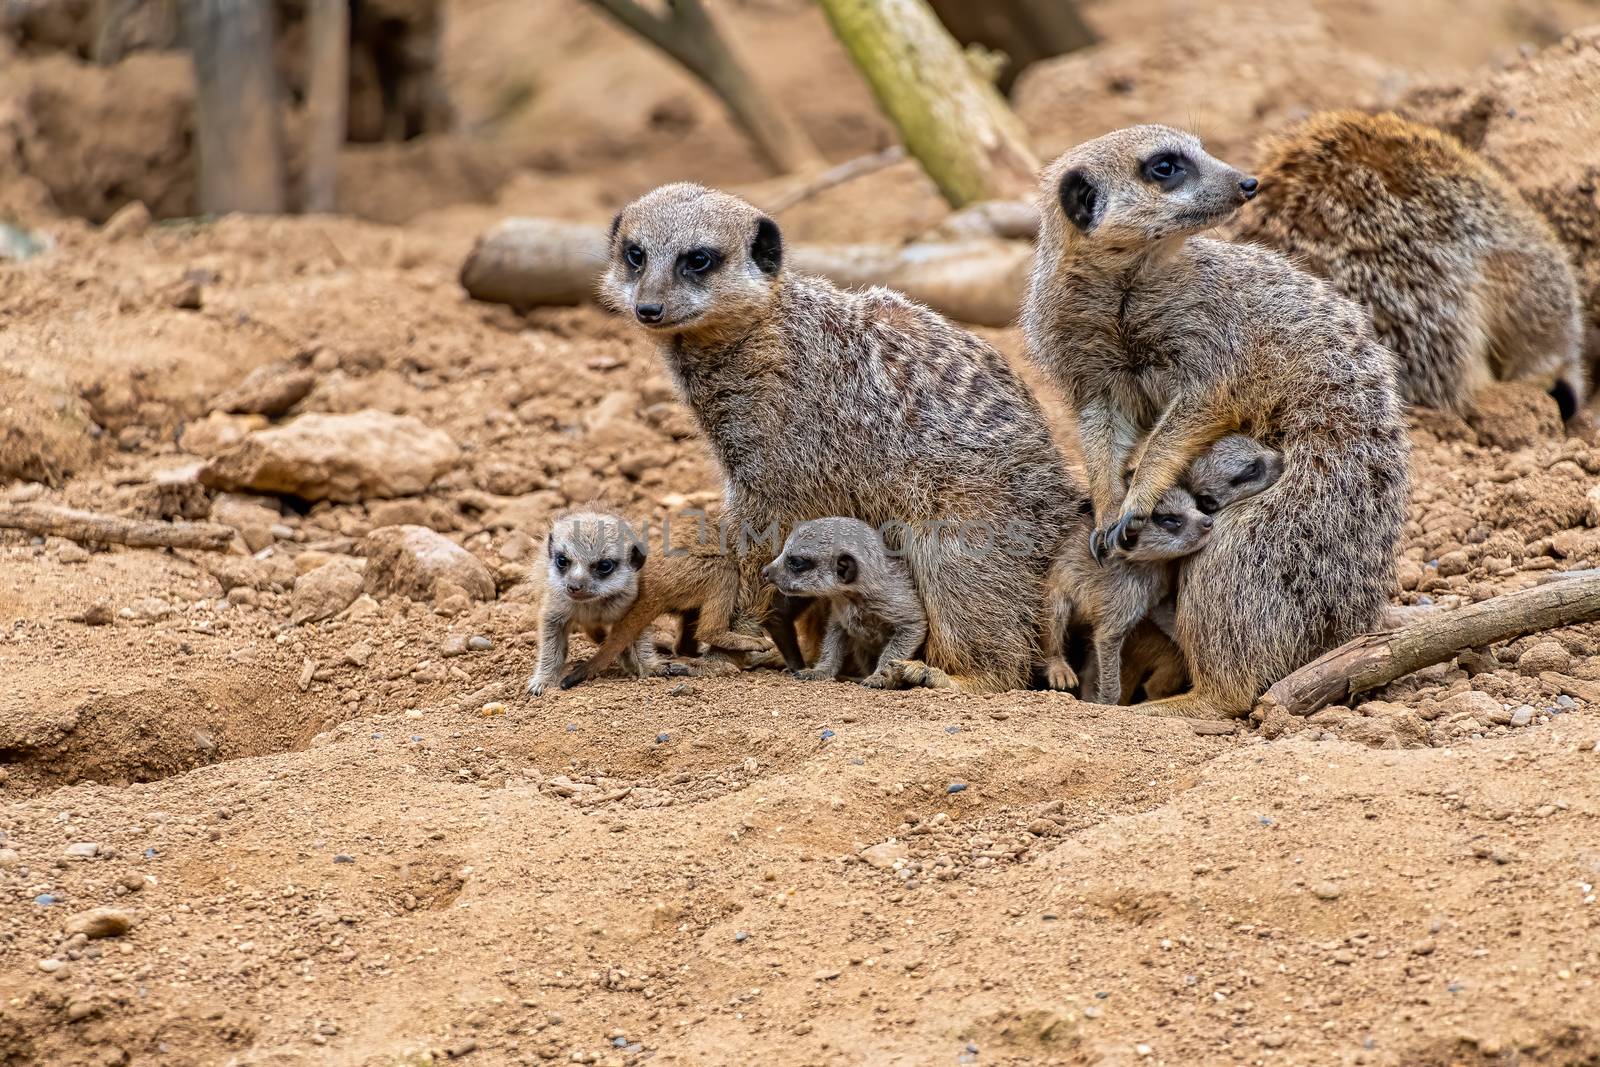 A pair of Meerkats with their baby pups